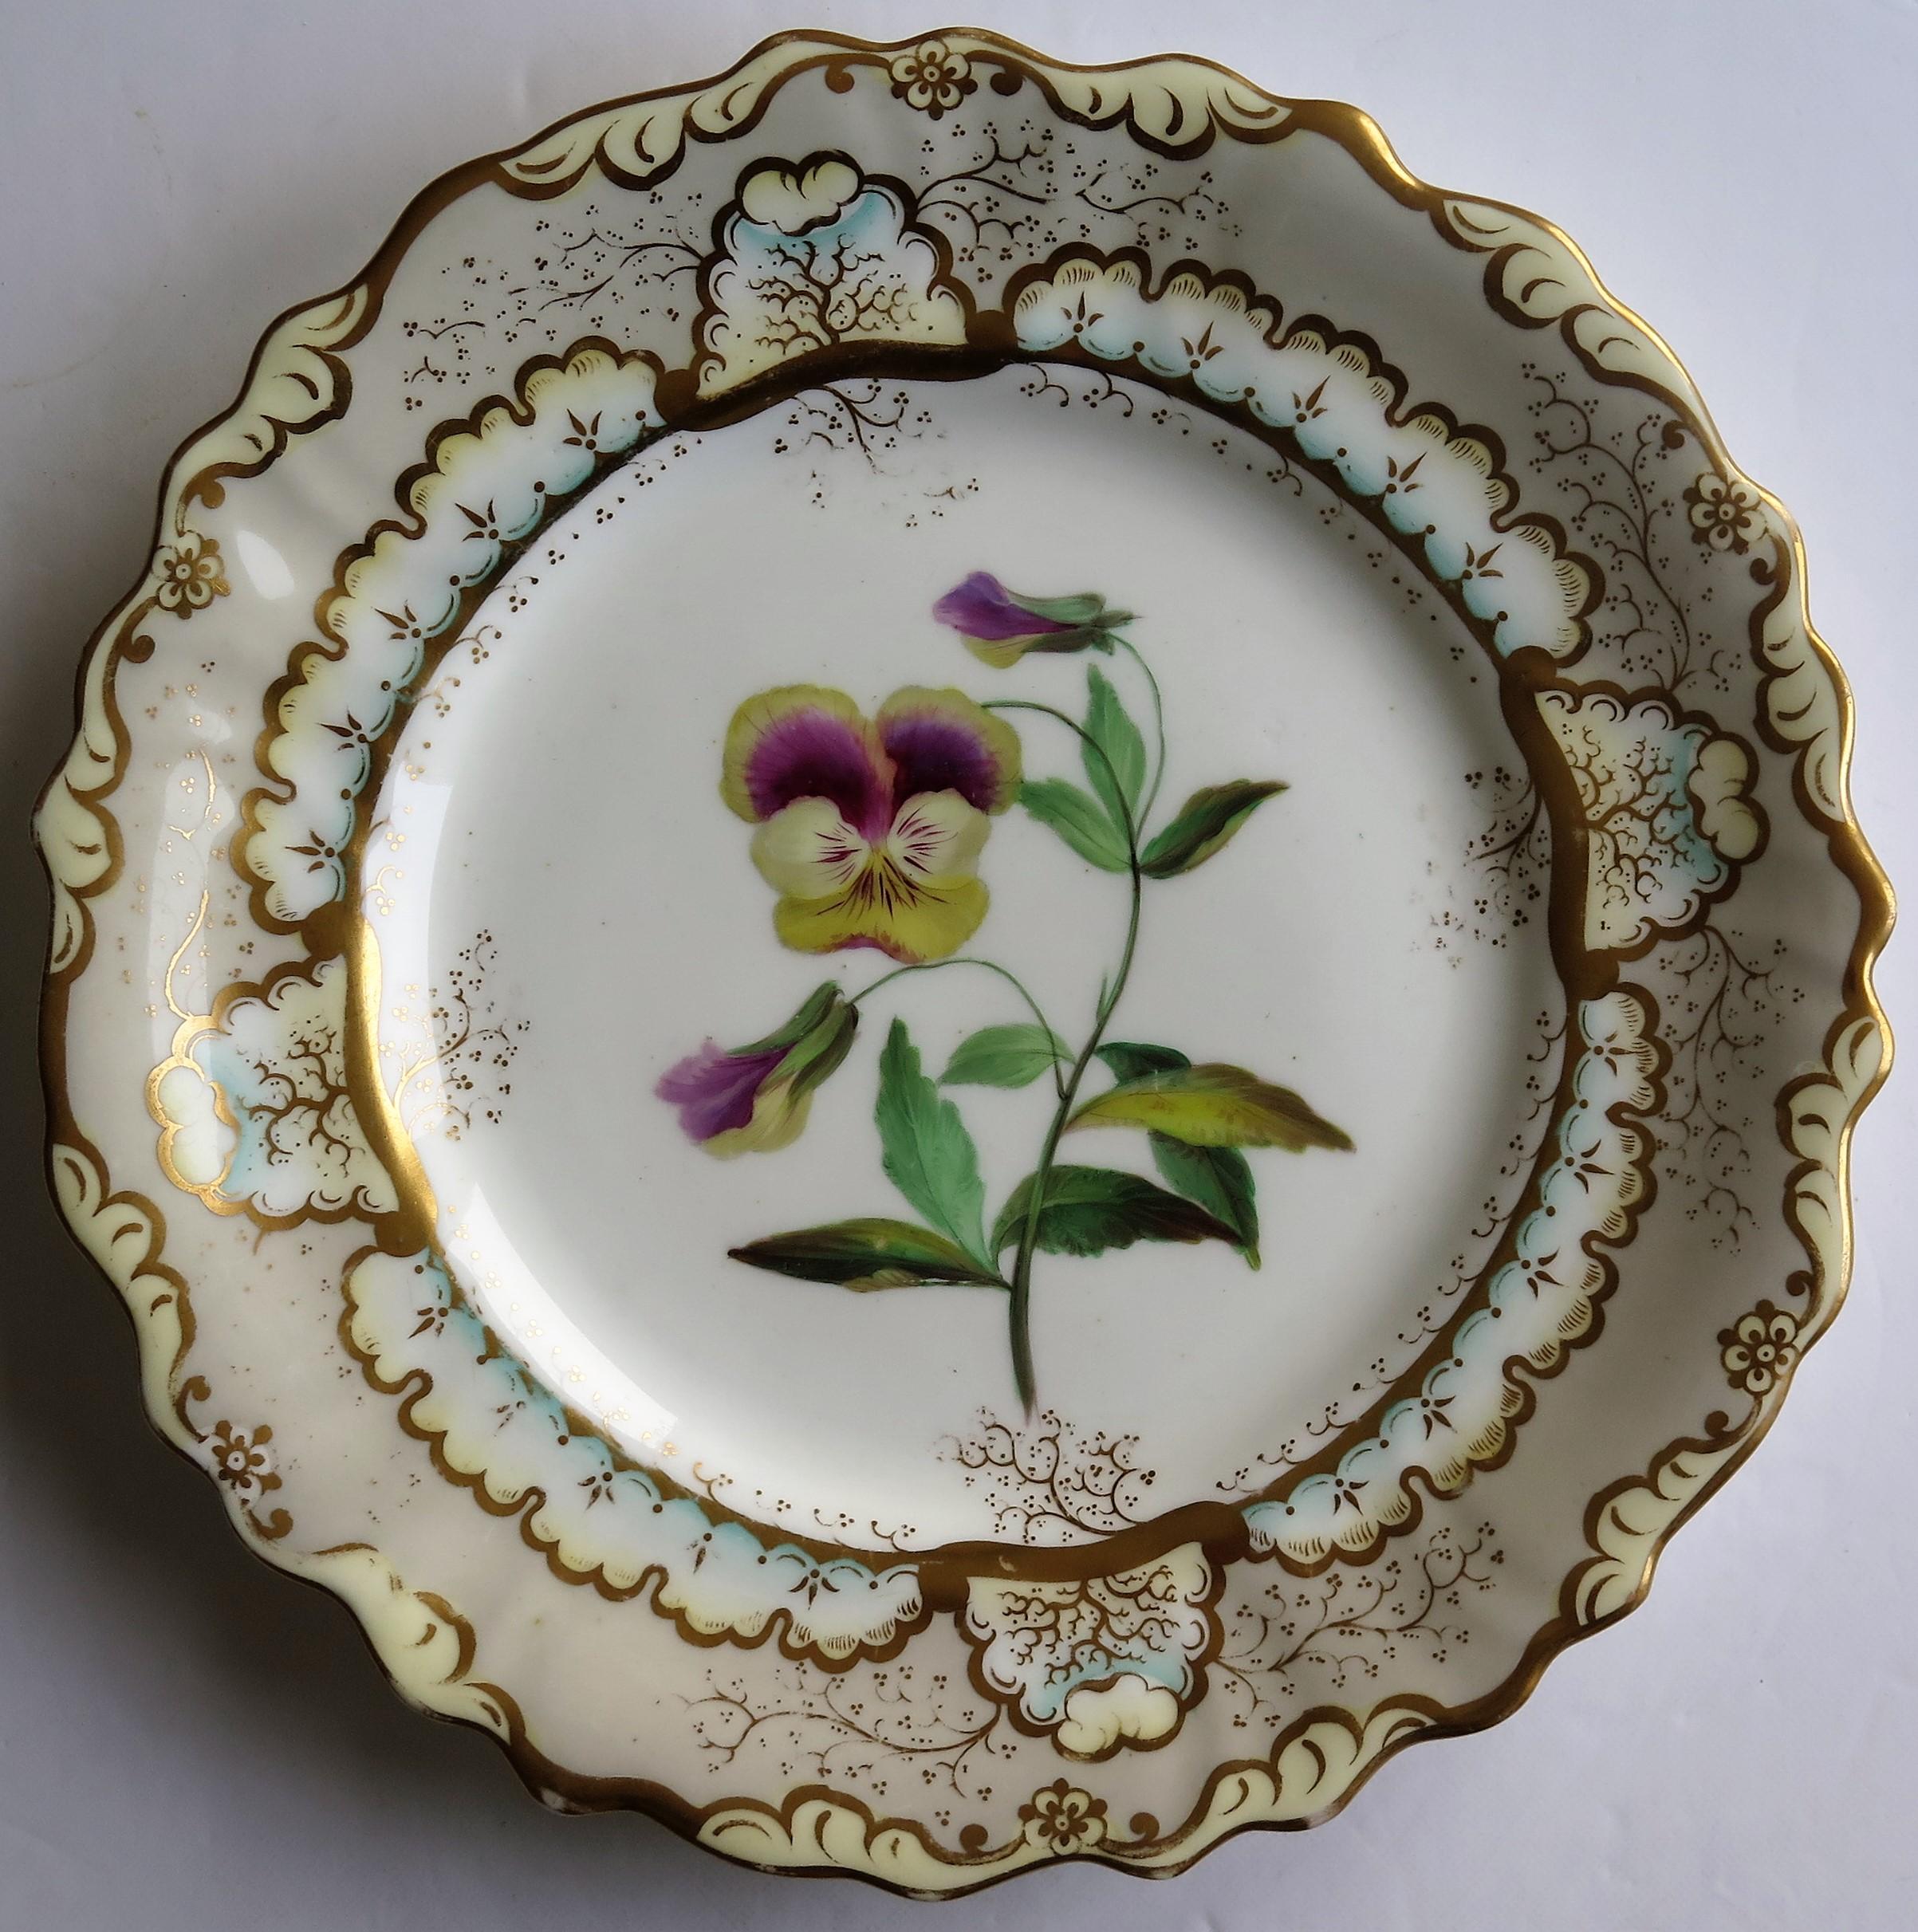 This is a very high quality, finely hand painted botanical plate, that we attribute to Samuel Alcock, of Hill Pottery, Burslem, Staffordshire Potteries, England and dating to the early 19th century late Georgian period, circa 1835.

This plate is